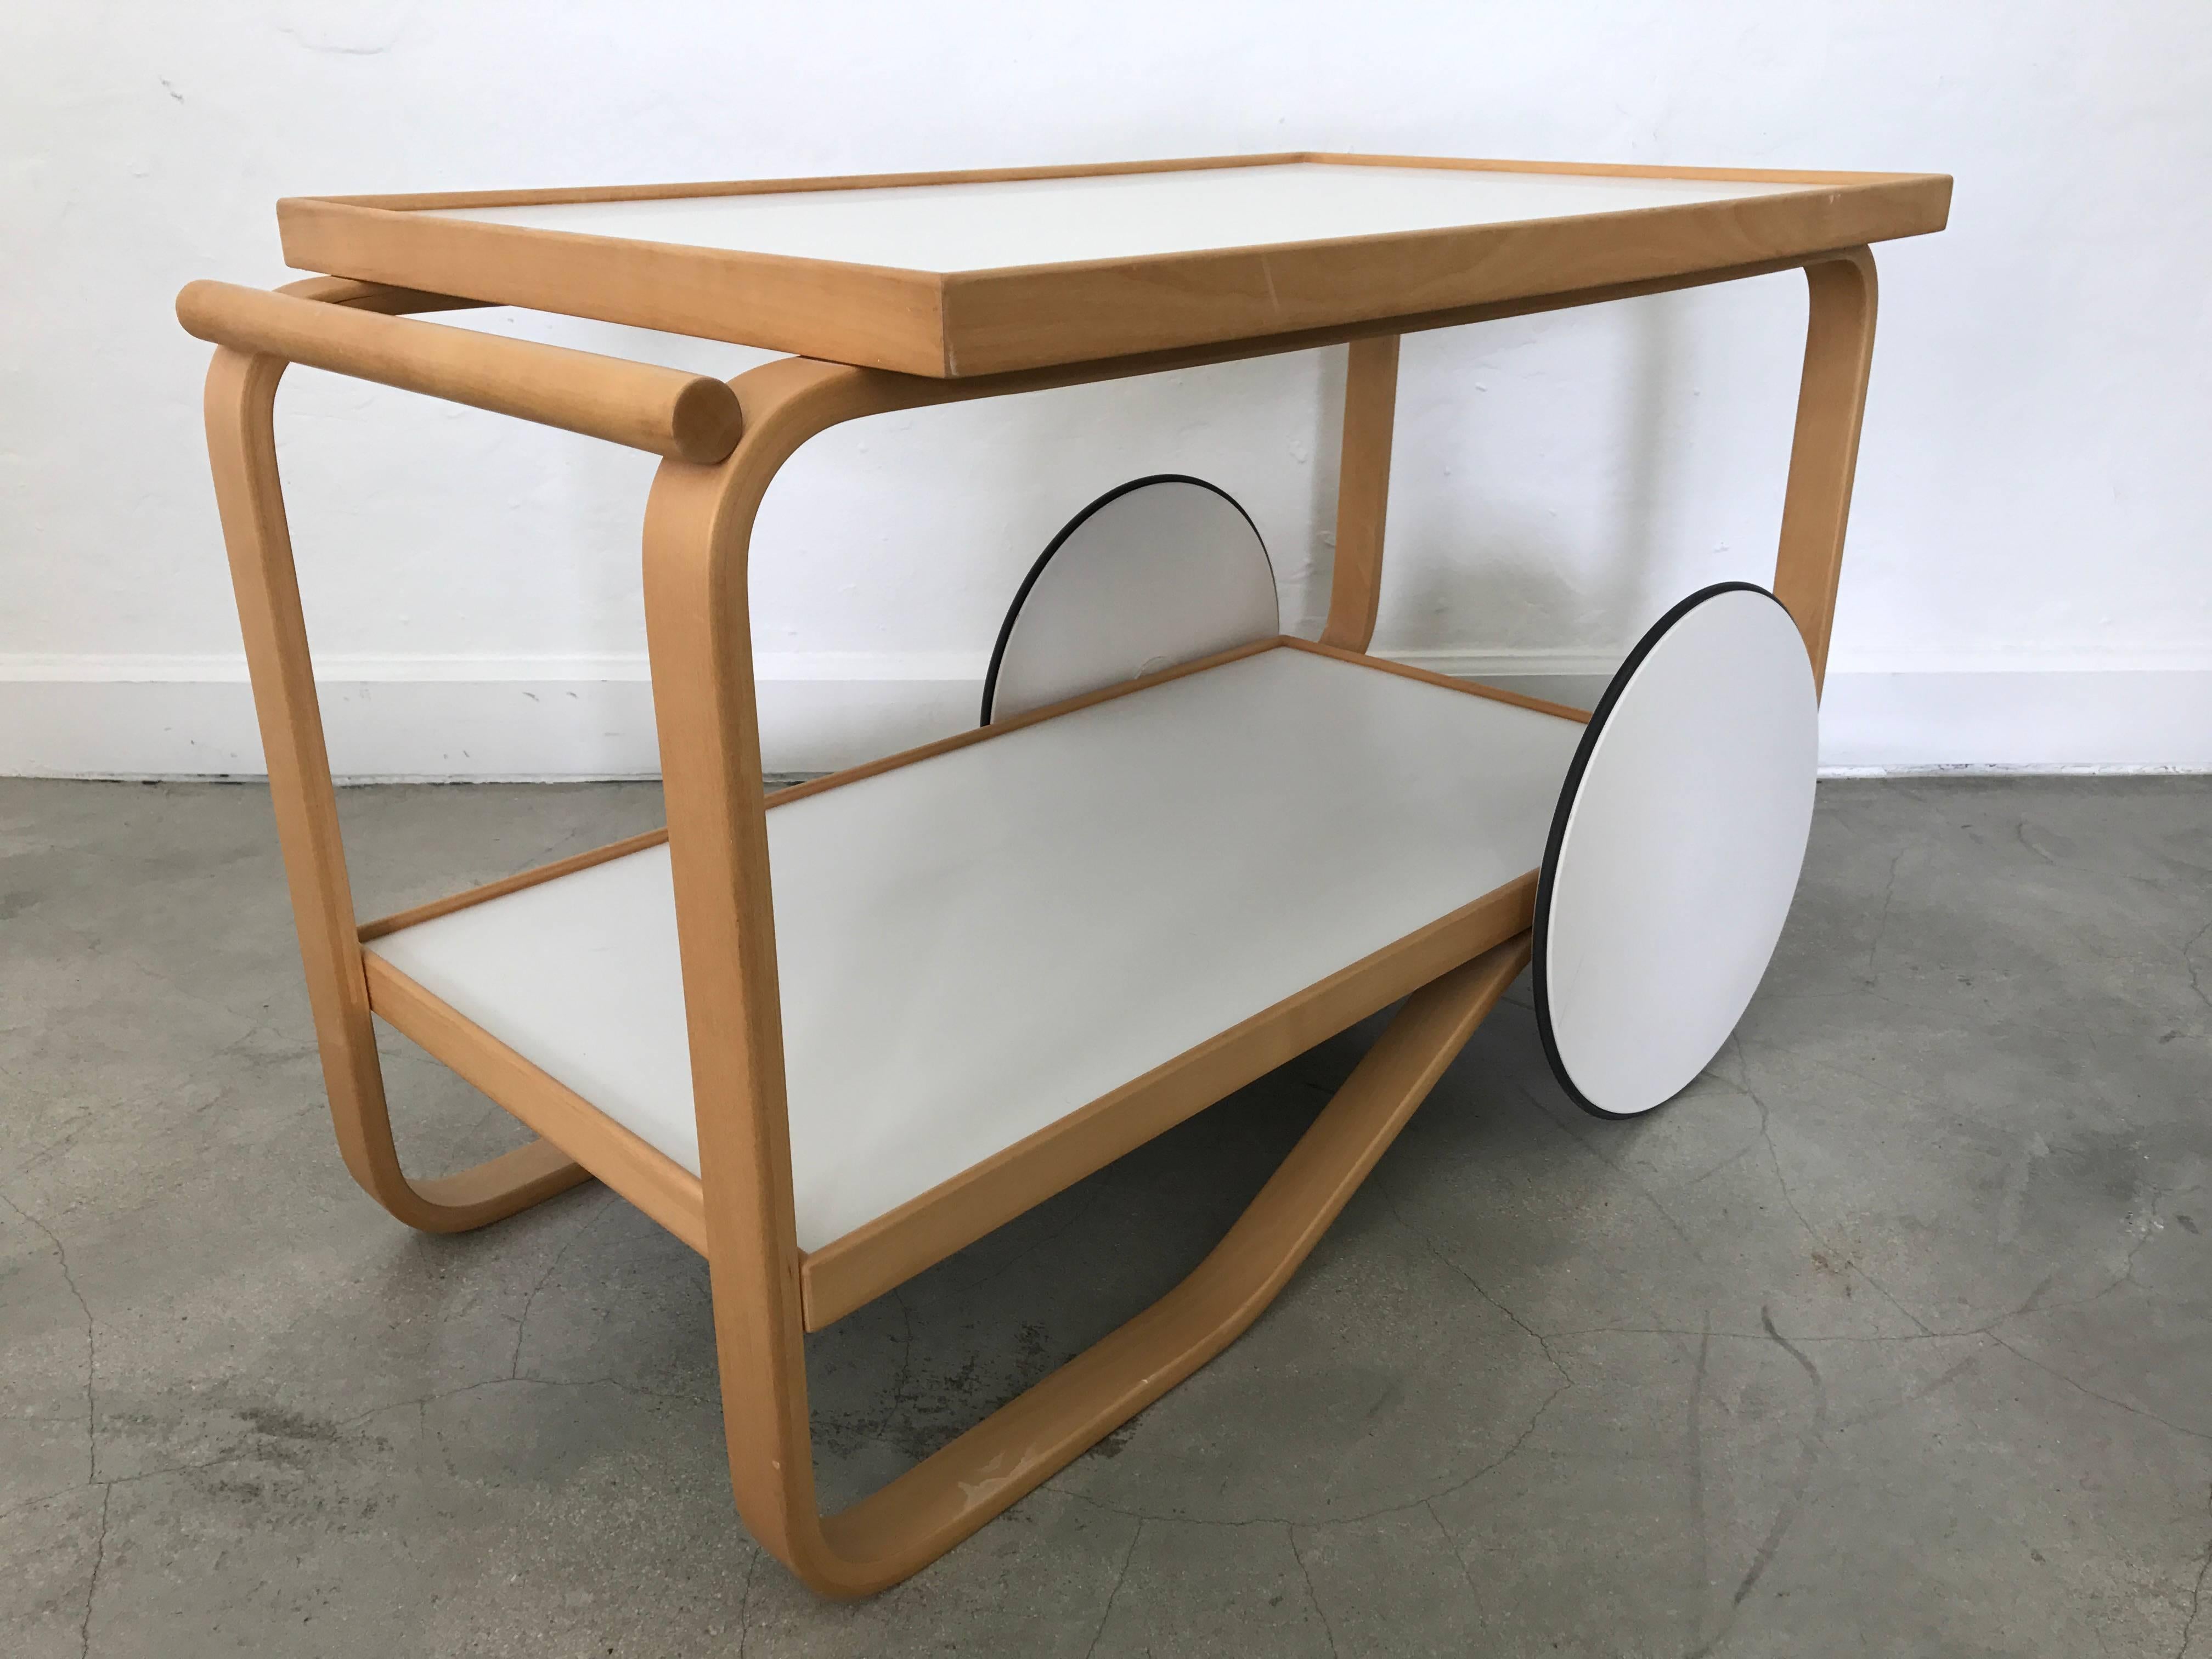 Bent birchwood with white lacquered tray tea cart or bar cart by Alvar Aalto for Artek.